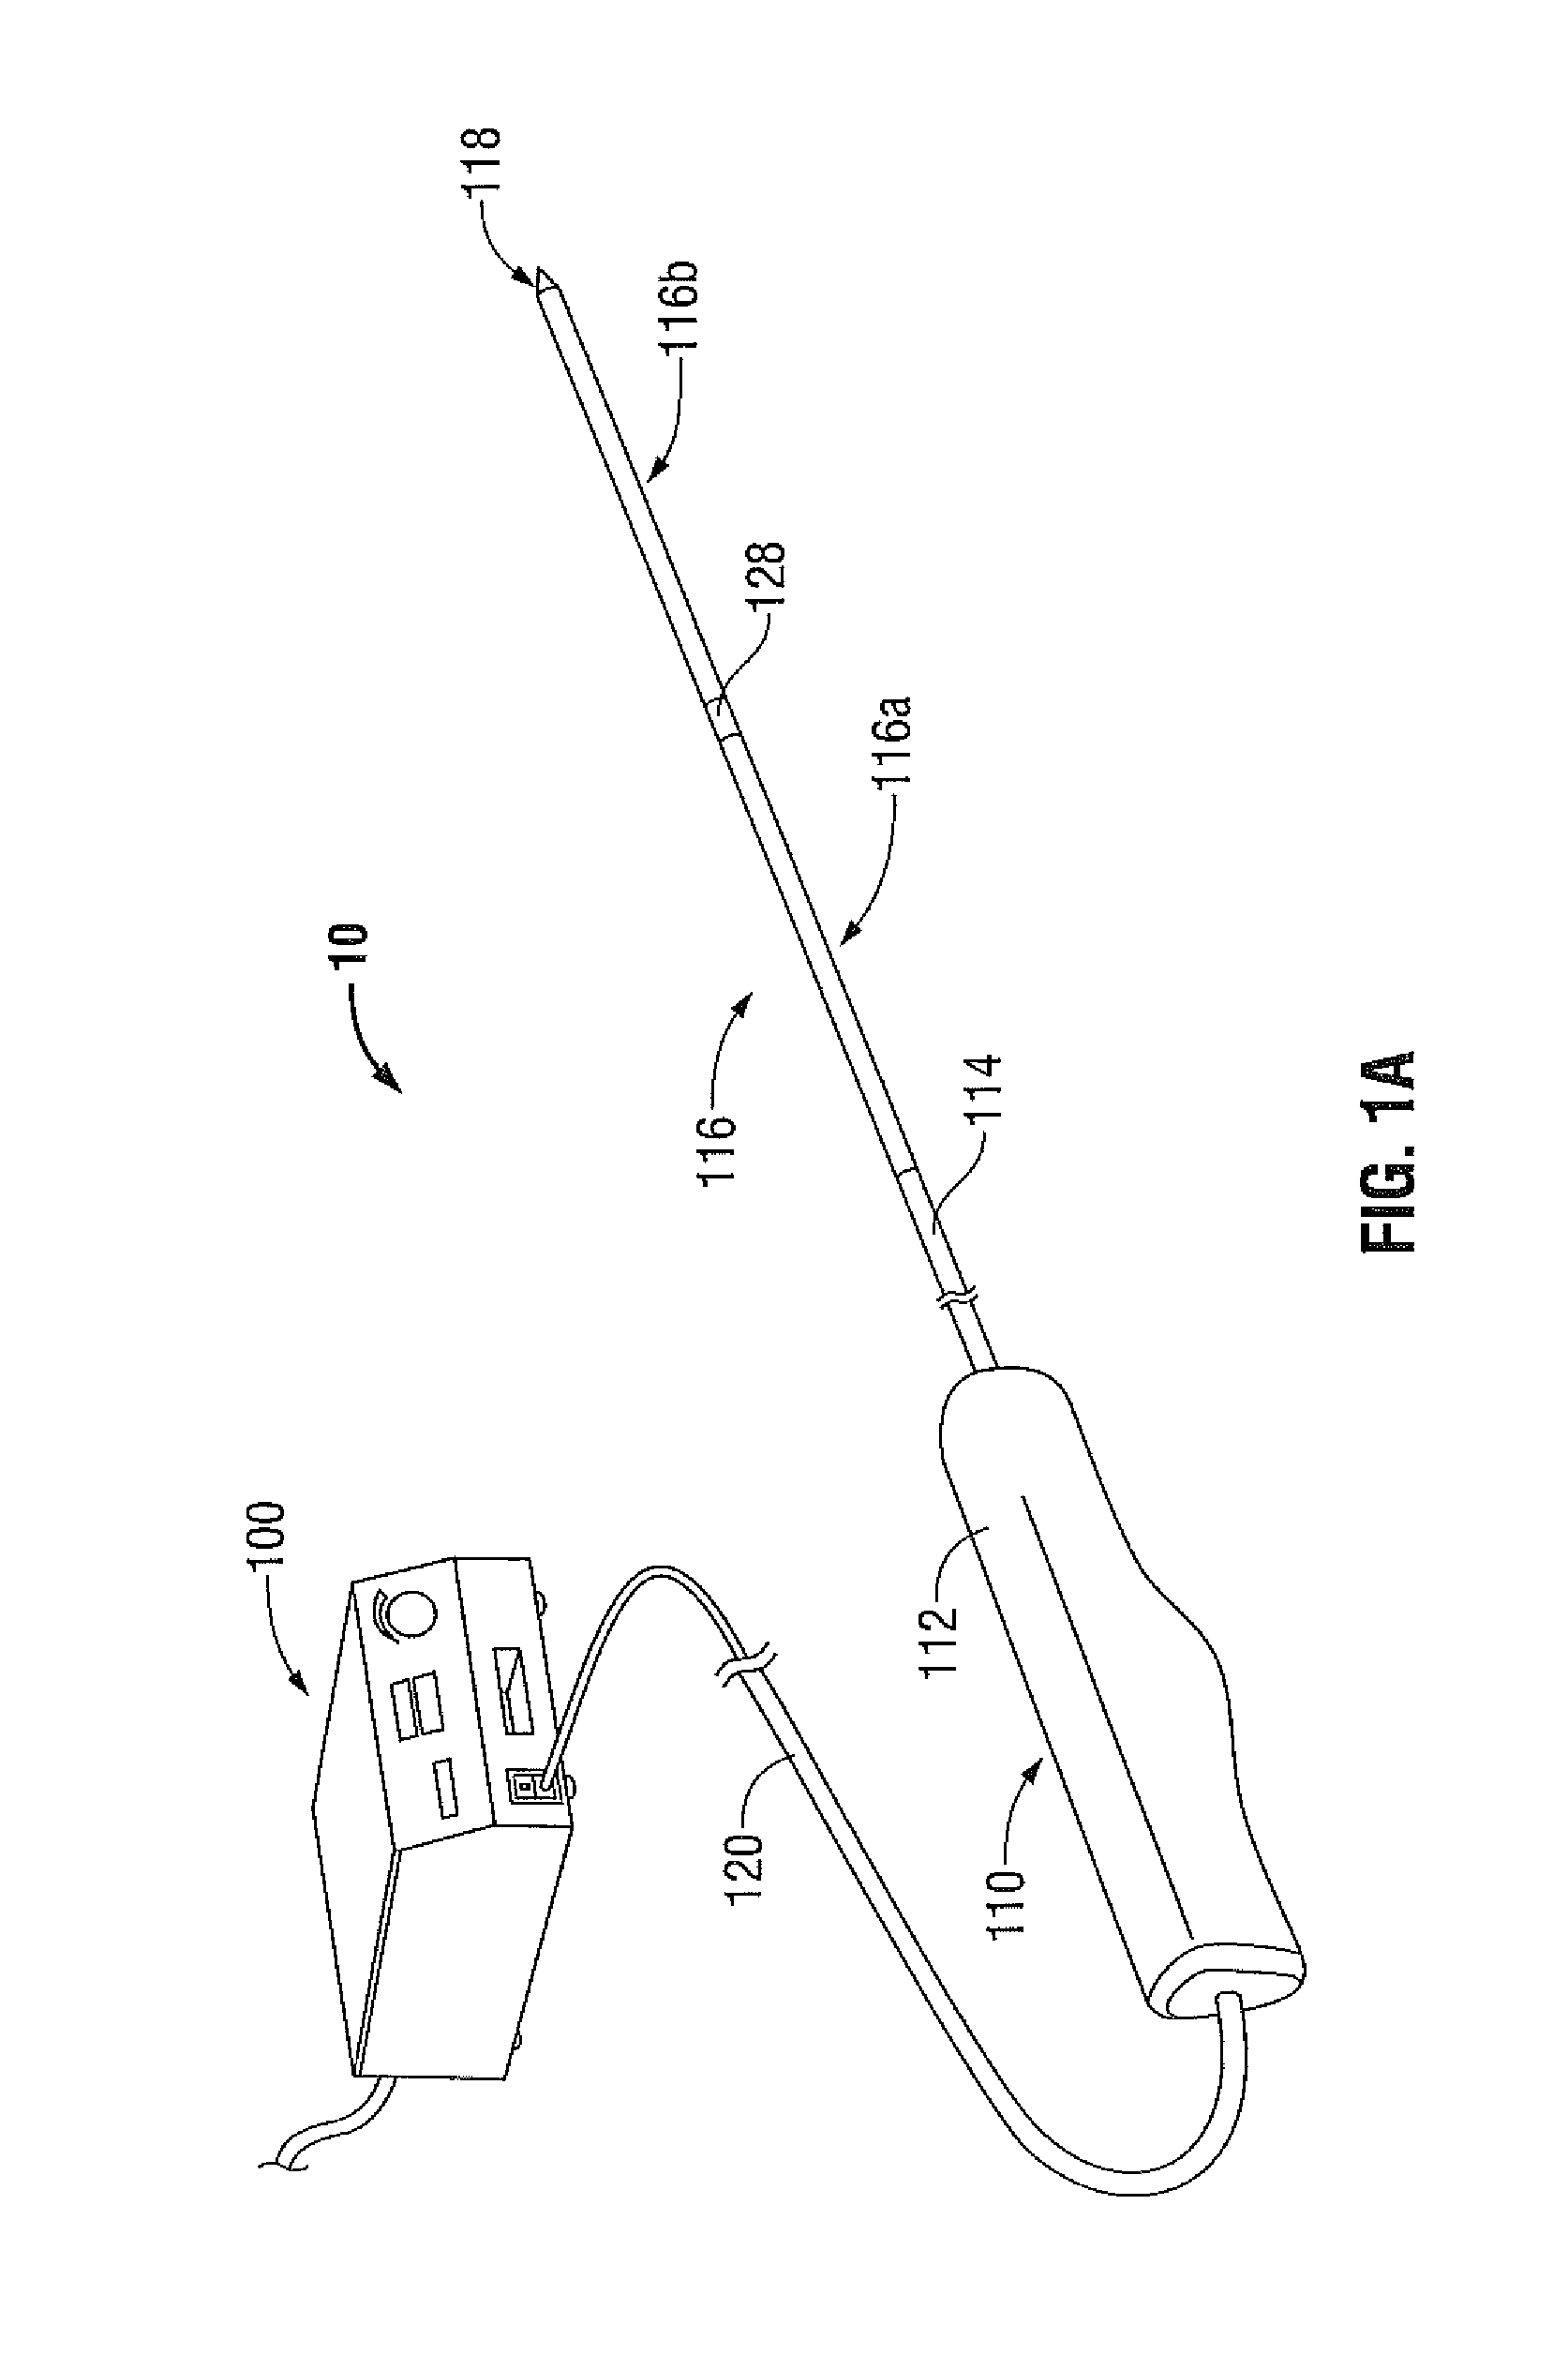 Dual antenna microwave resection and ablation device, system and method of use